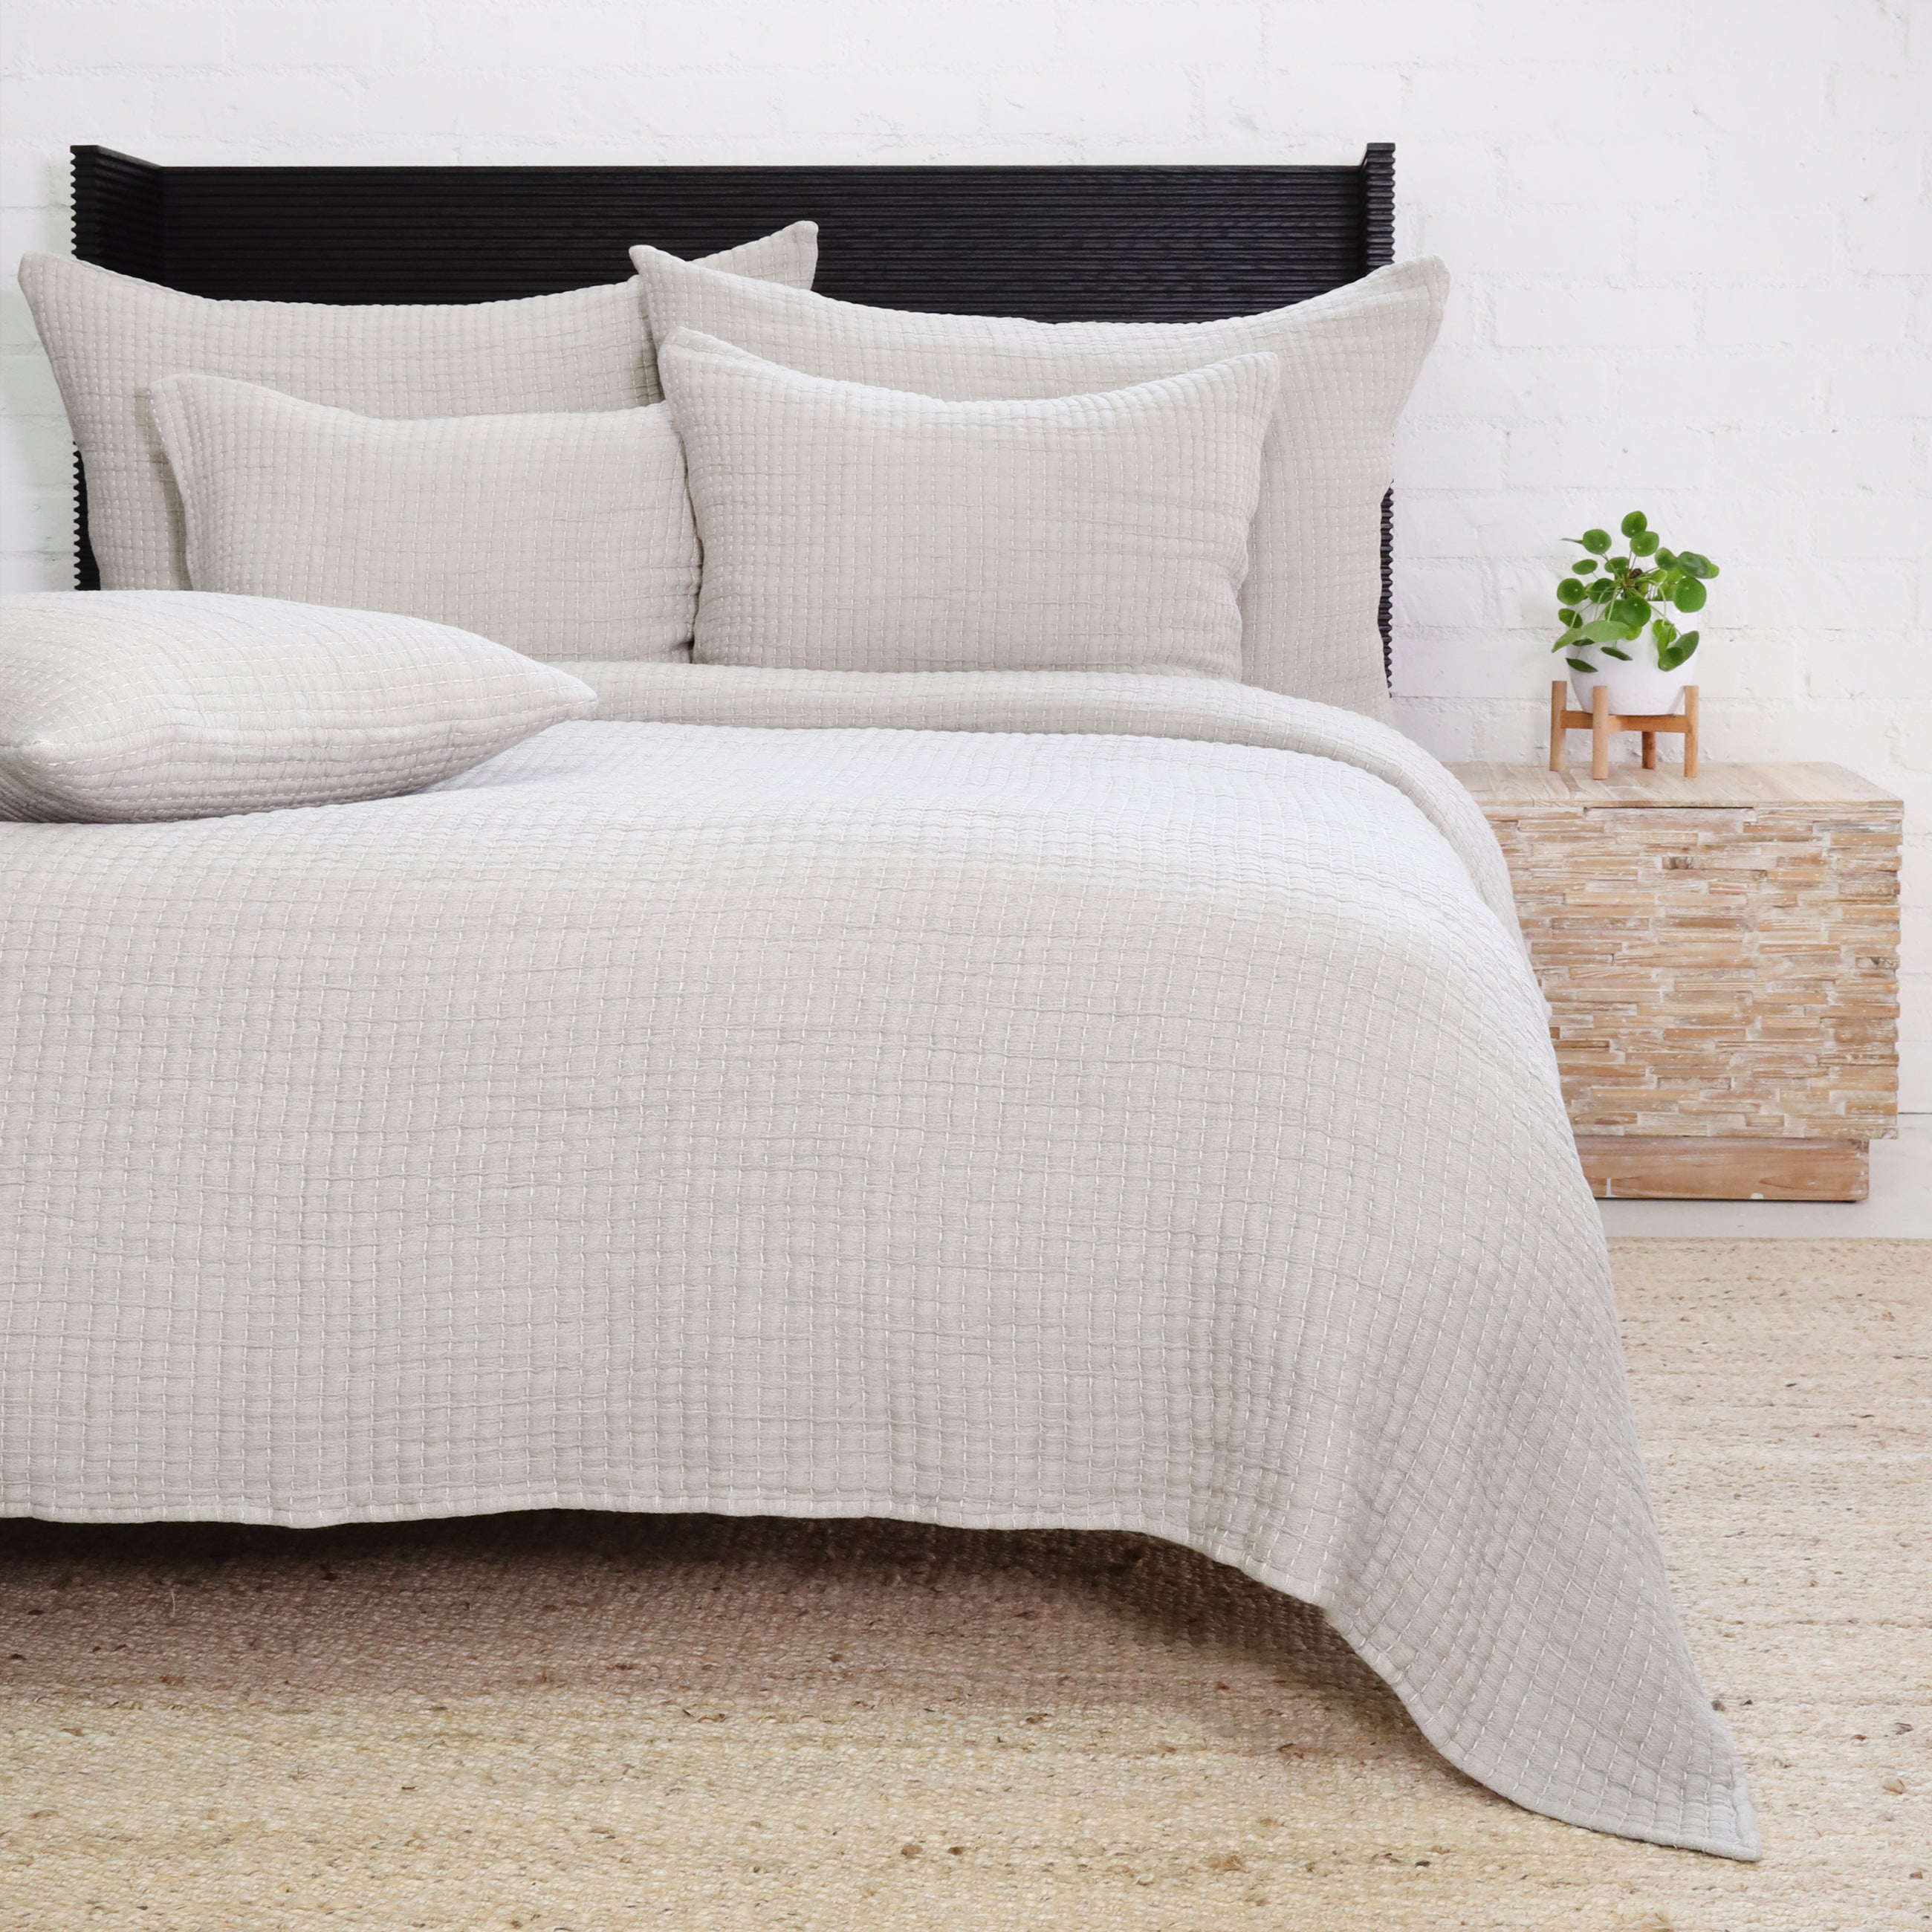 Add textural interest to your bed with the Vancouver Coverlet collection. Made of a lightweight stonewashed cotton gauze with an interwoven ivory stripe, it is the perfect addition to your bed to create a relaxing space. Amethyst Home provides interior design, new construction, custom furniture, and area rugs in the Tampa metro area.